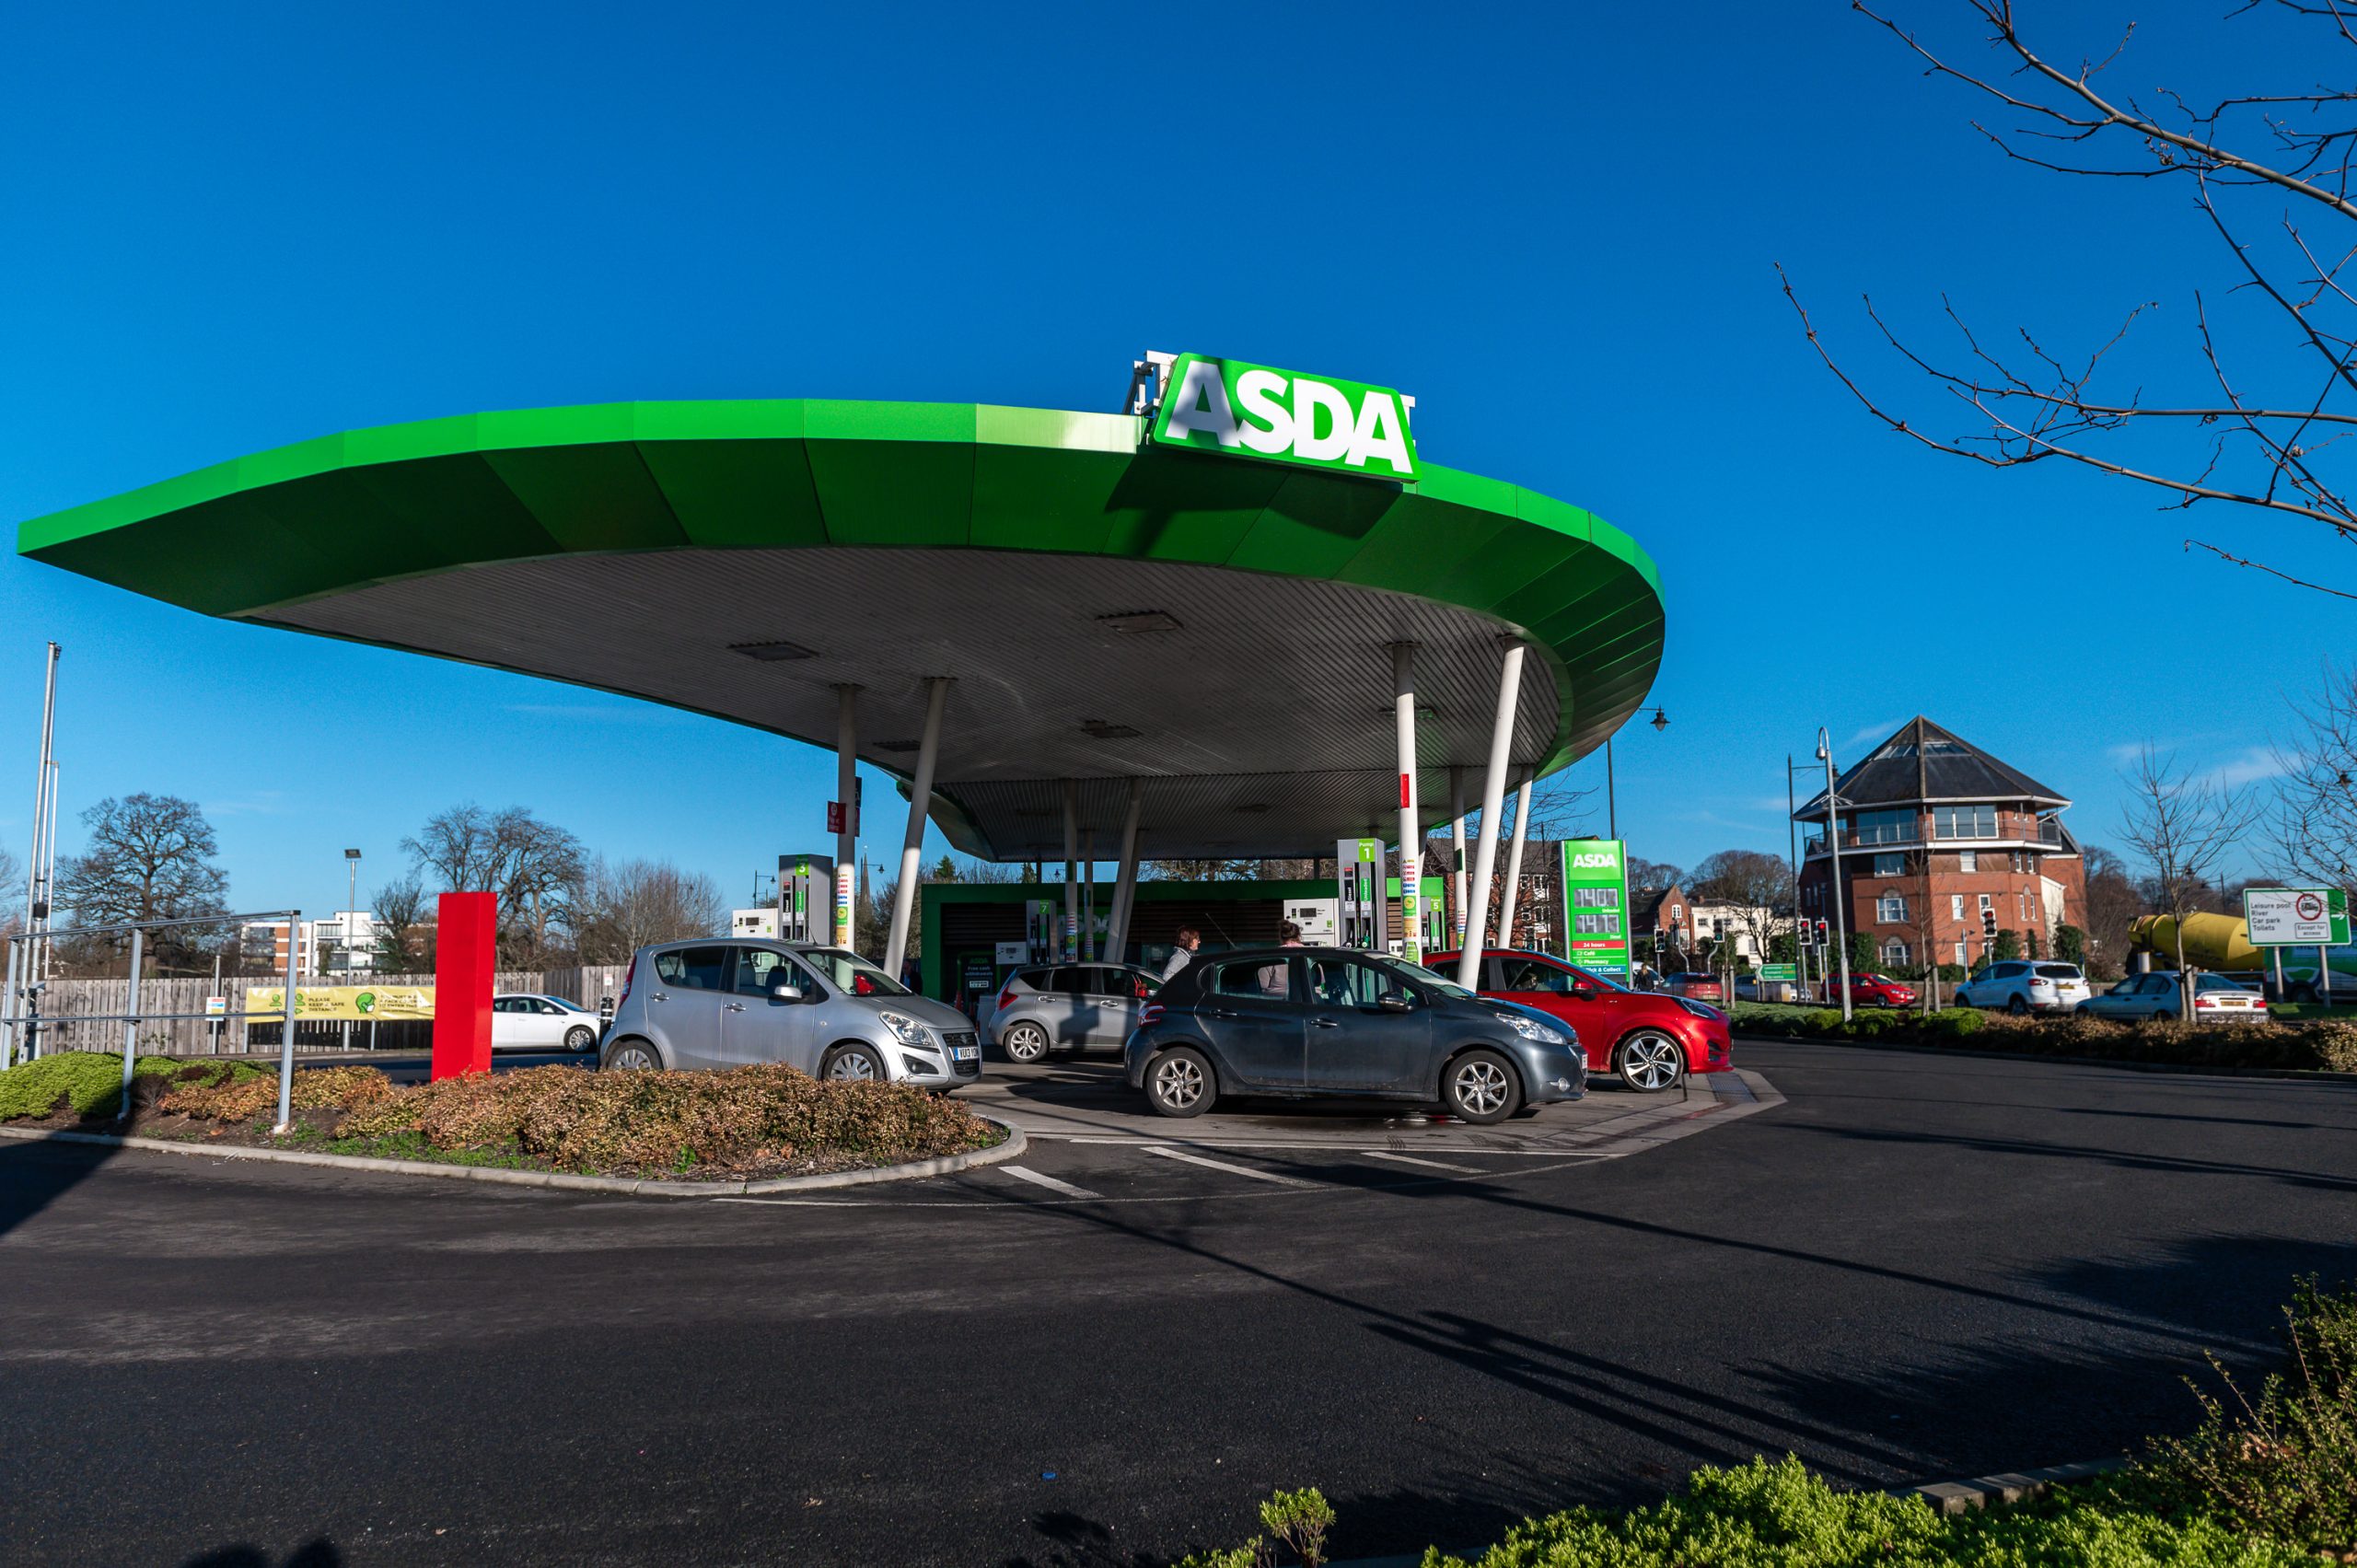 NEWS | Petrol prices likely to rise above £1.50 per litre in the United Kingdom as a result of Ukraine crisis